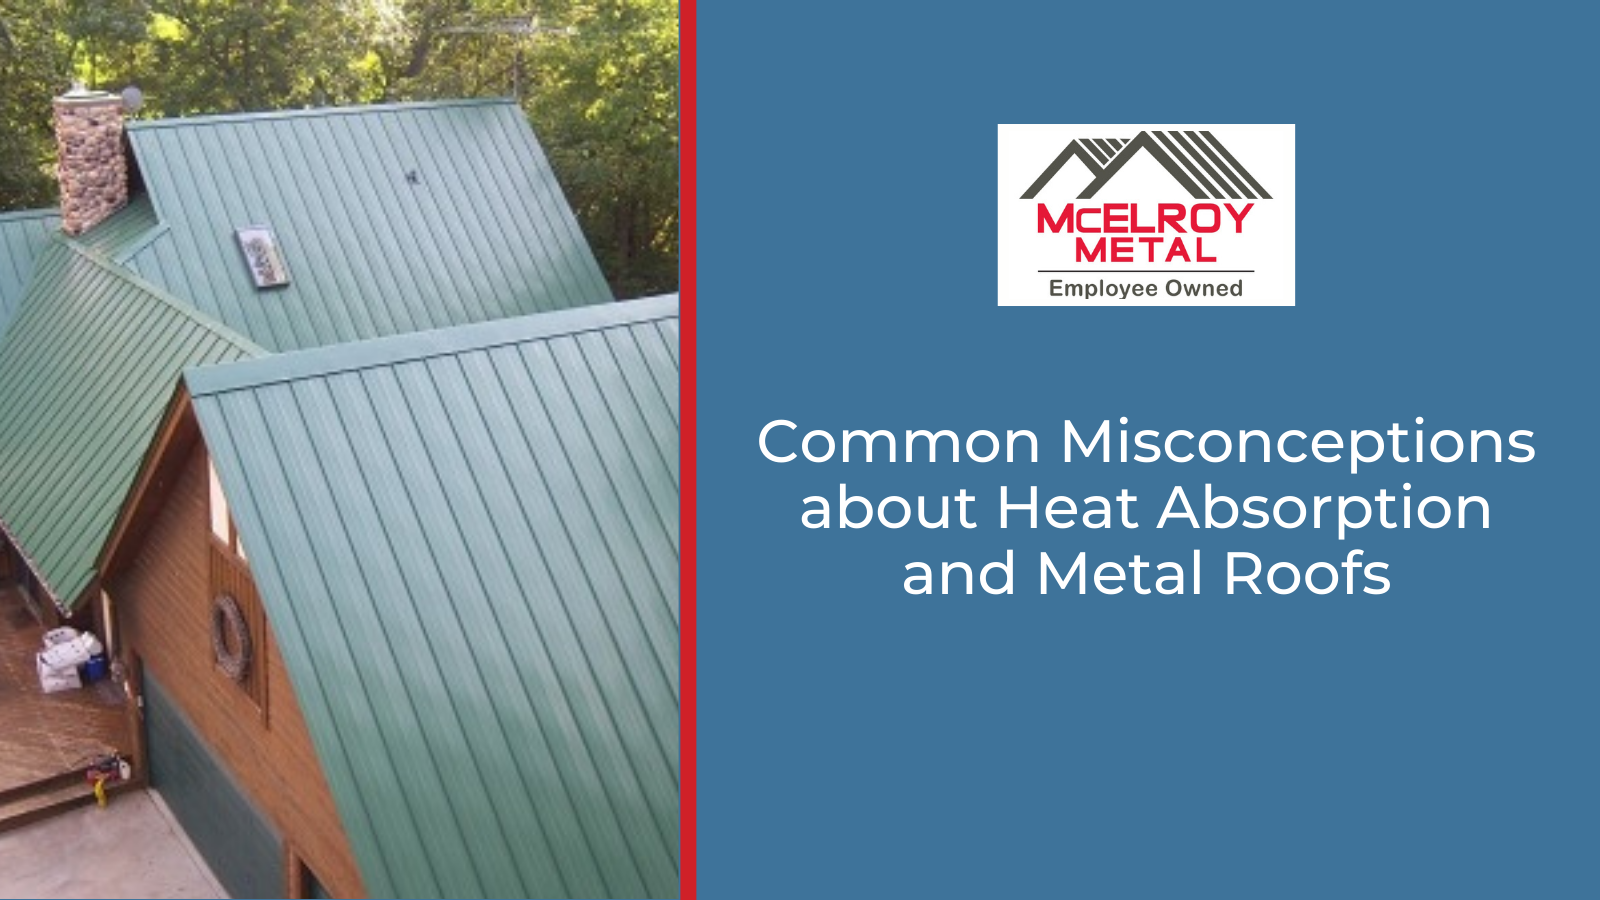 Common Misconceptions about Heat Absorption and Metal Roofs